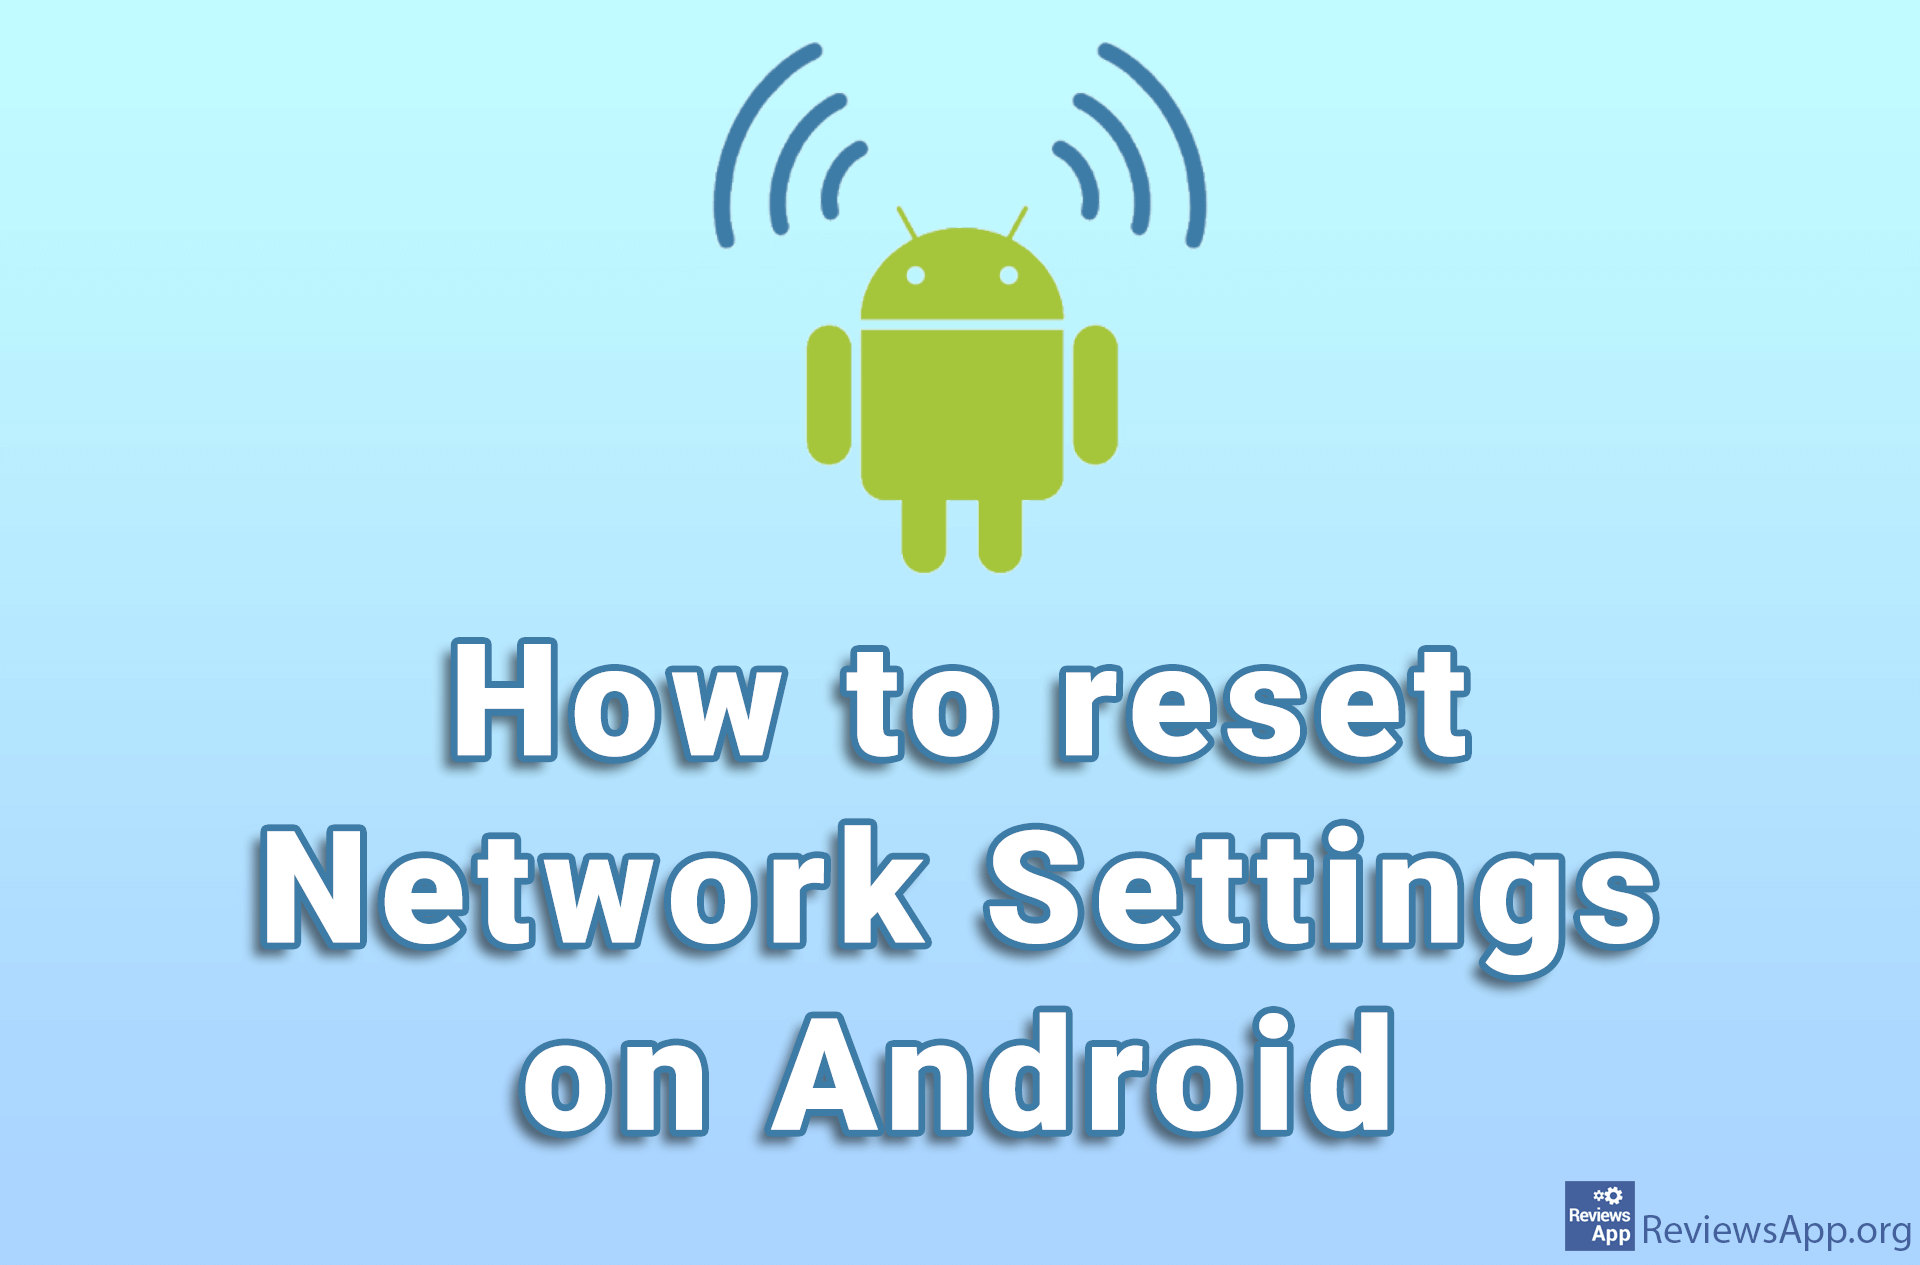 How to reset network settings on Android